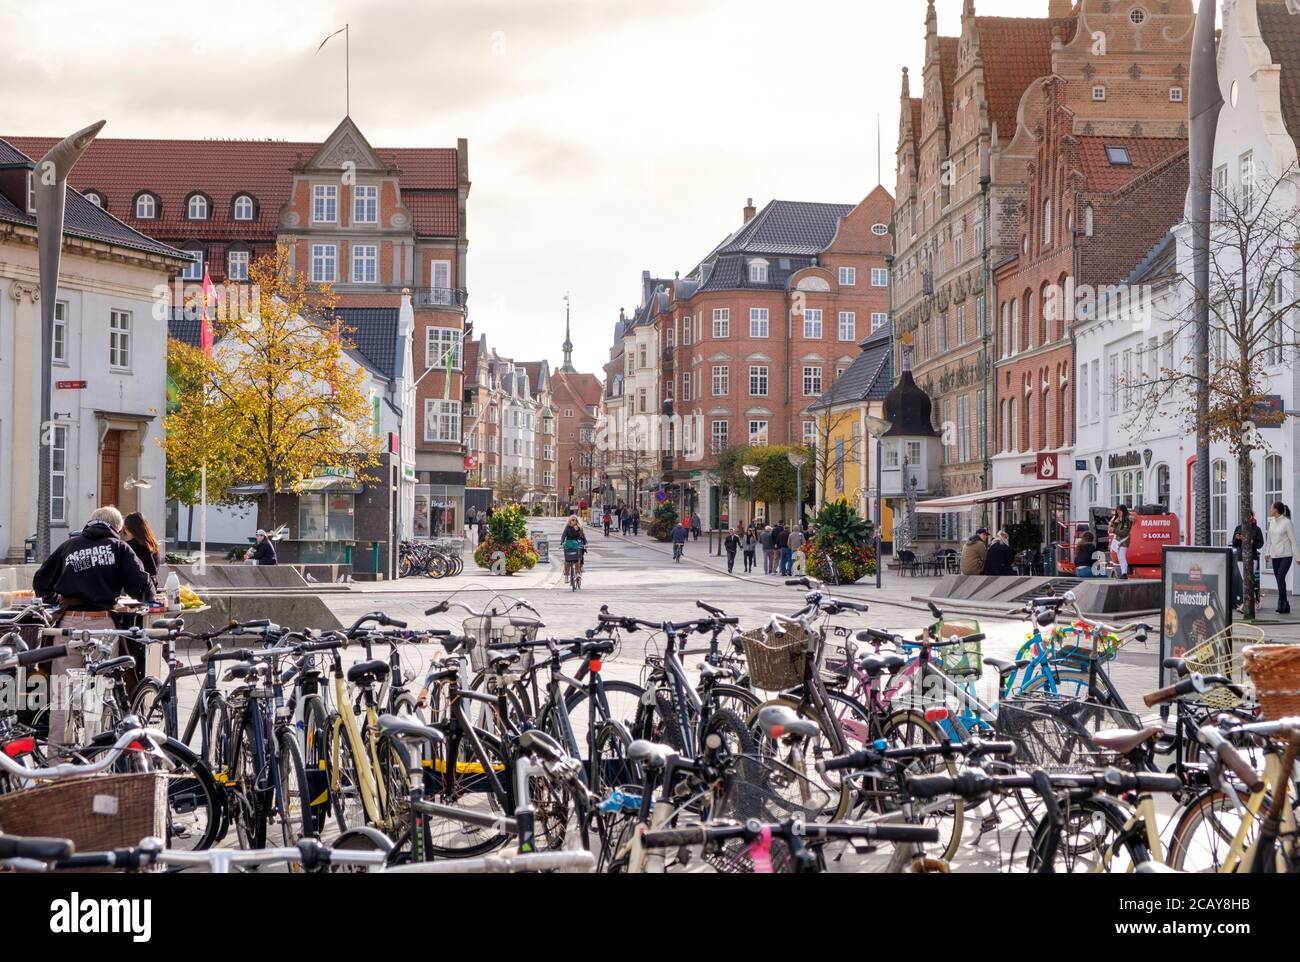 Bikes parked on a square in Aalborg, Denmark, Stock Photo